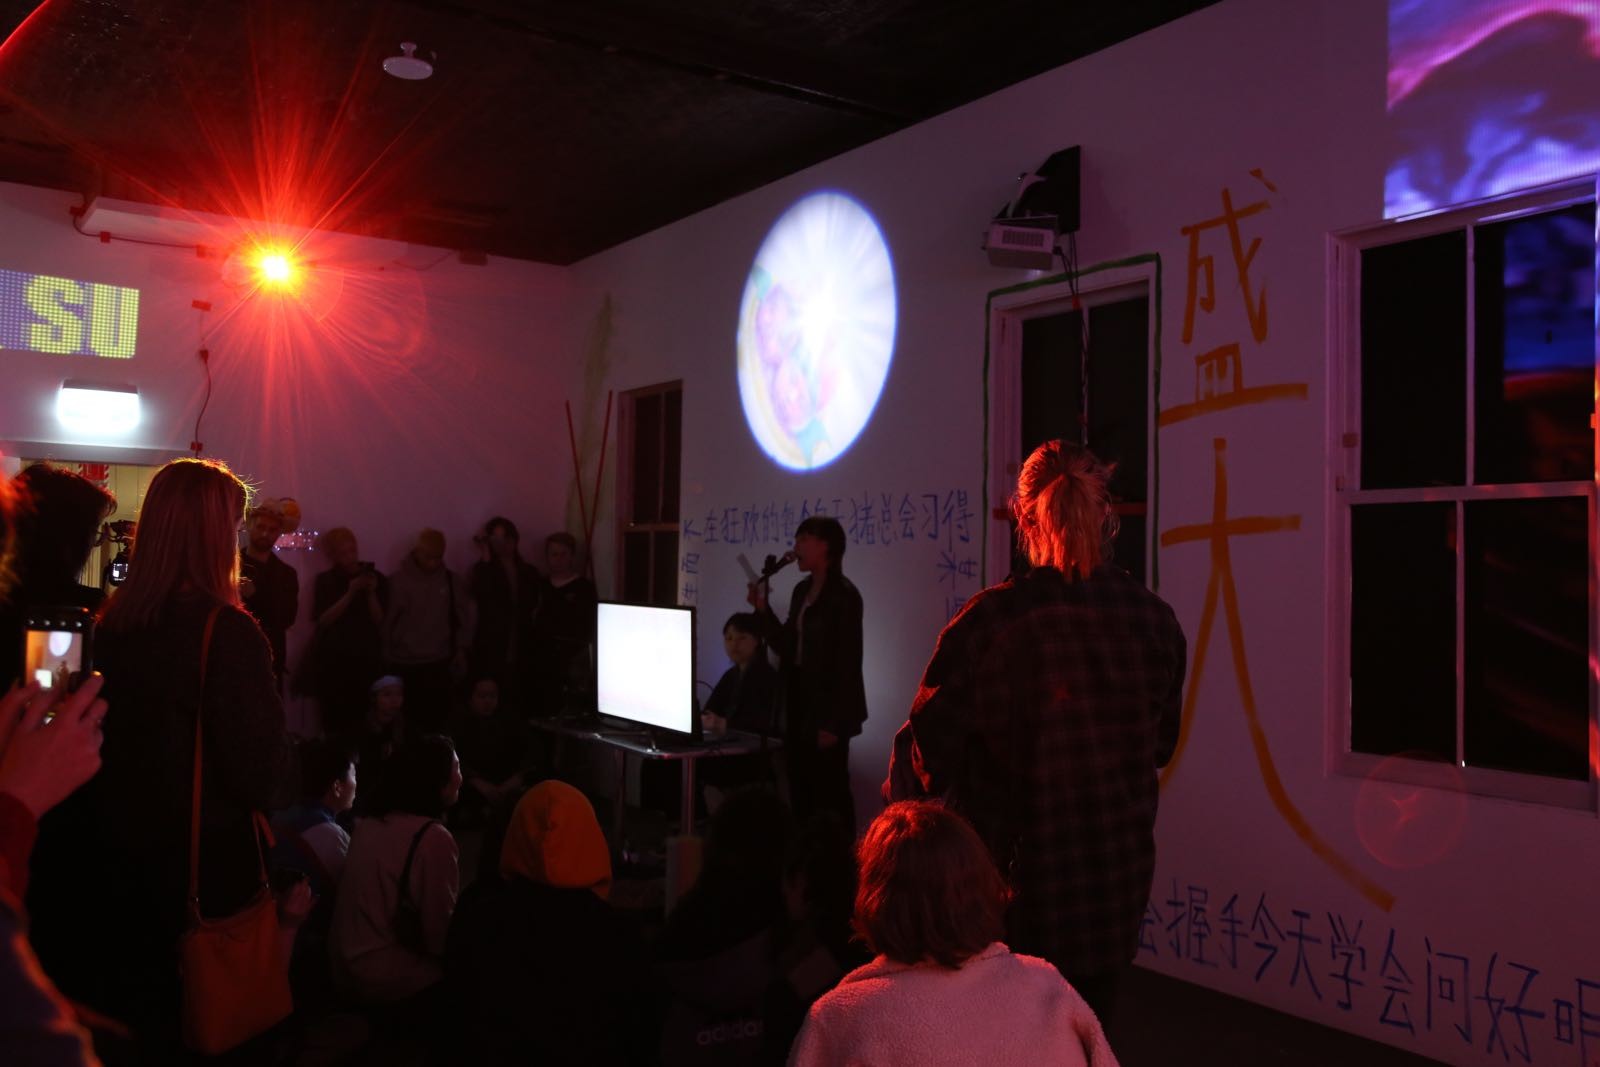 Two artists in a crowded room that is darkly lit with projections and coloured lighting.